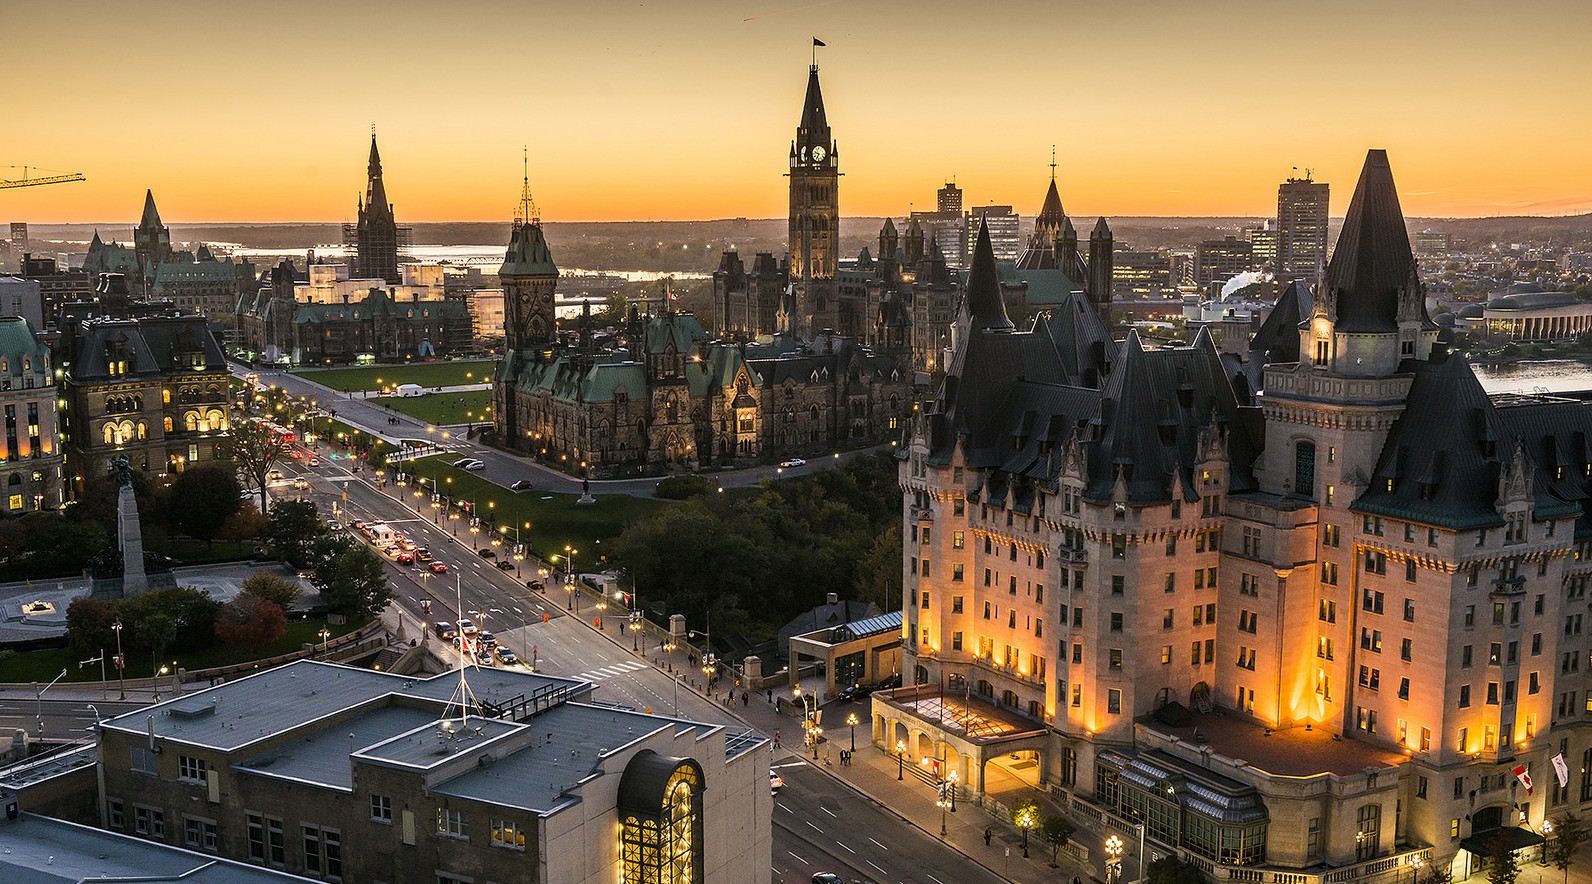 Canadian Destination No. 7: There’s More to Ottawa Than Politics